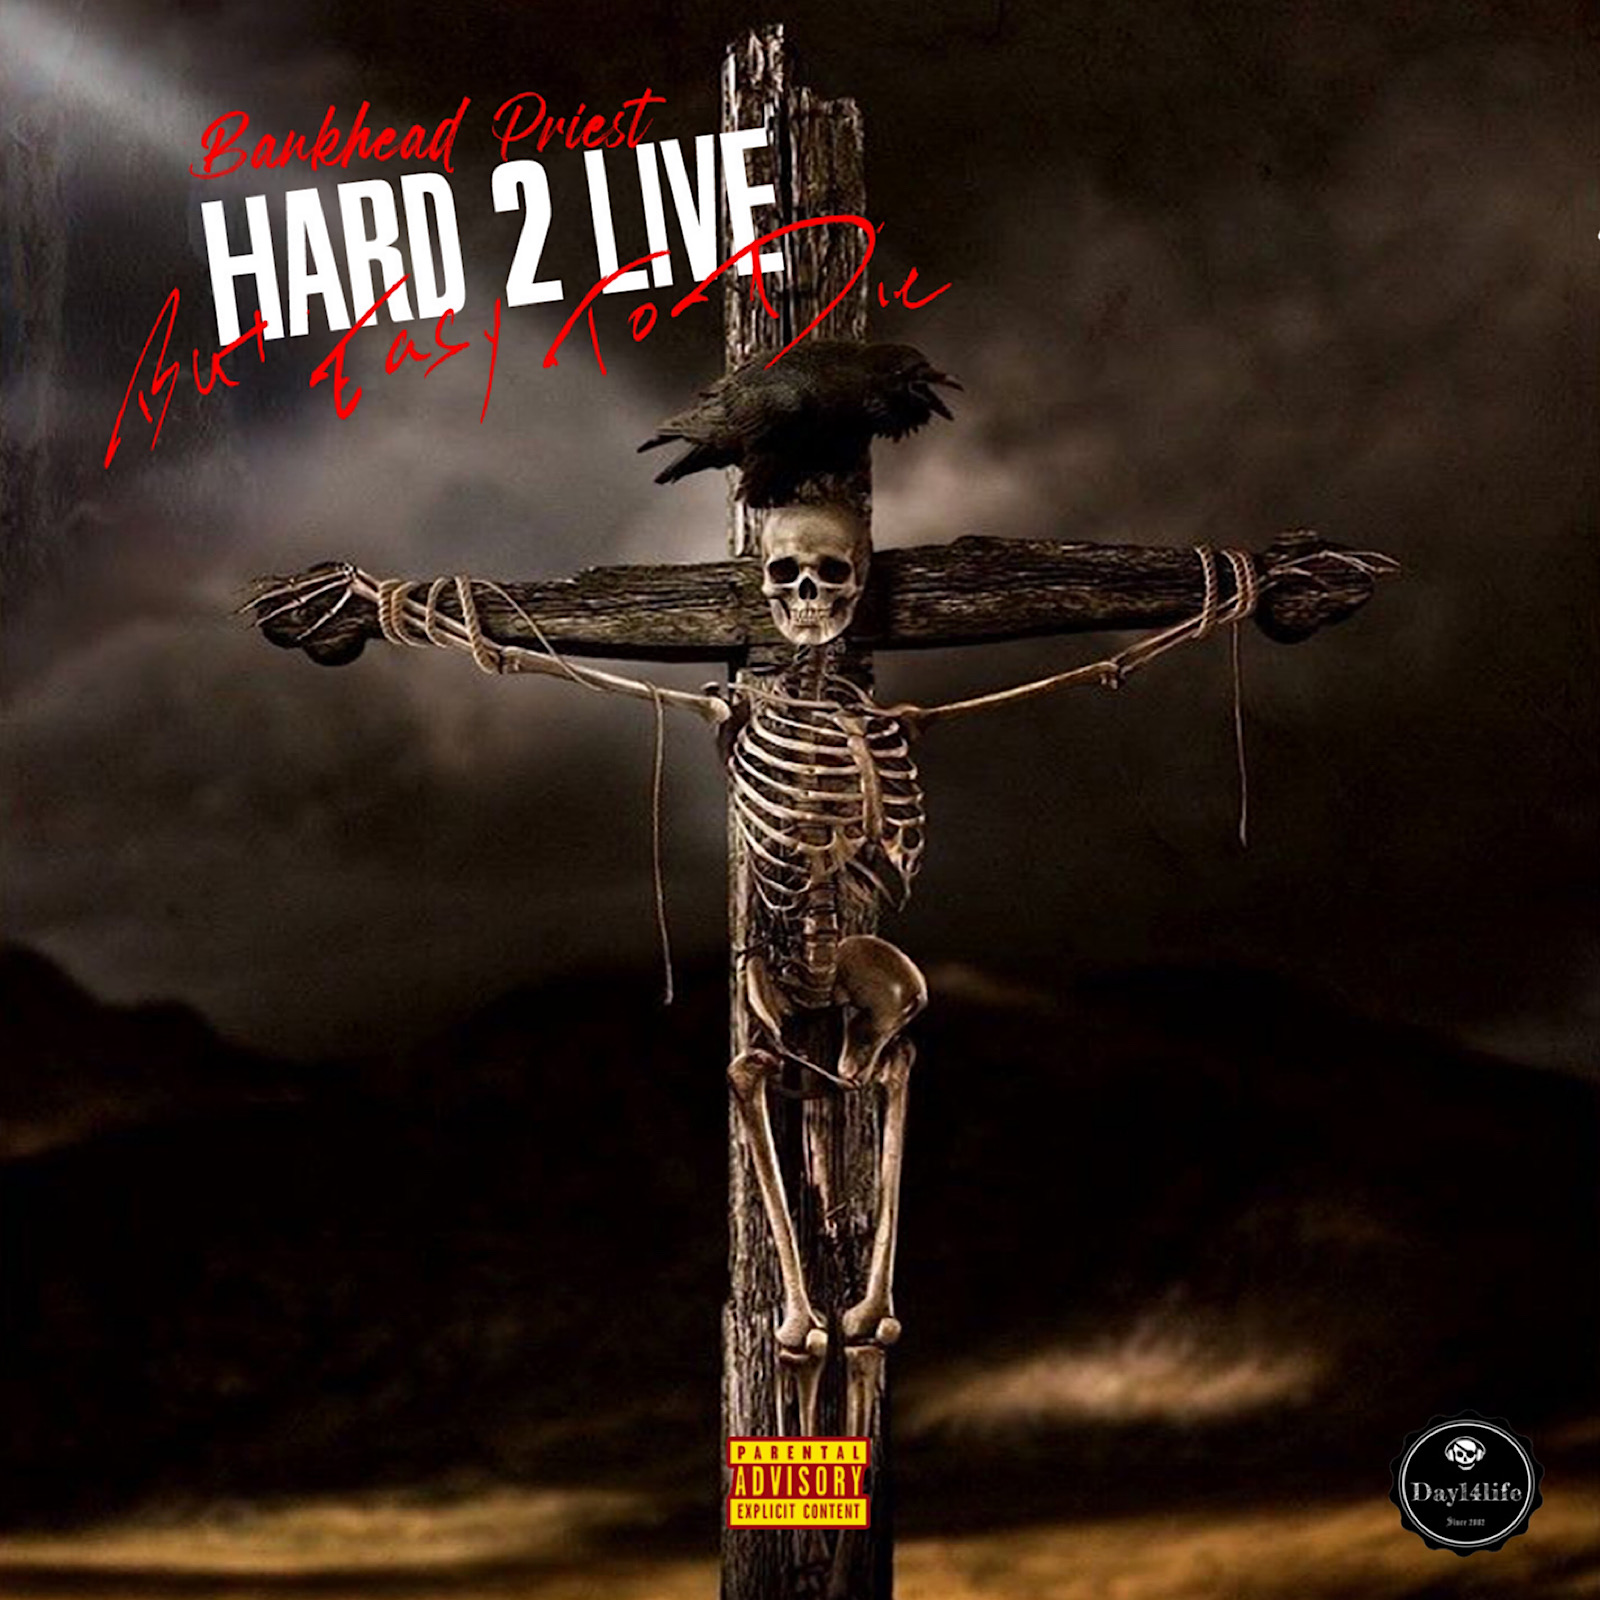 Bankhead Priest - Hard 2 Live But Easy To Die Cover Art